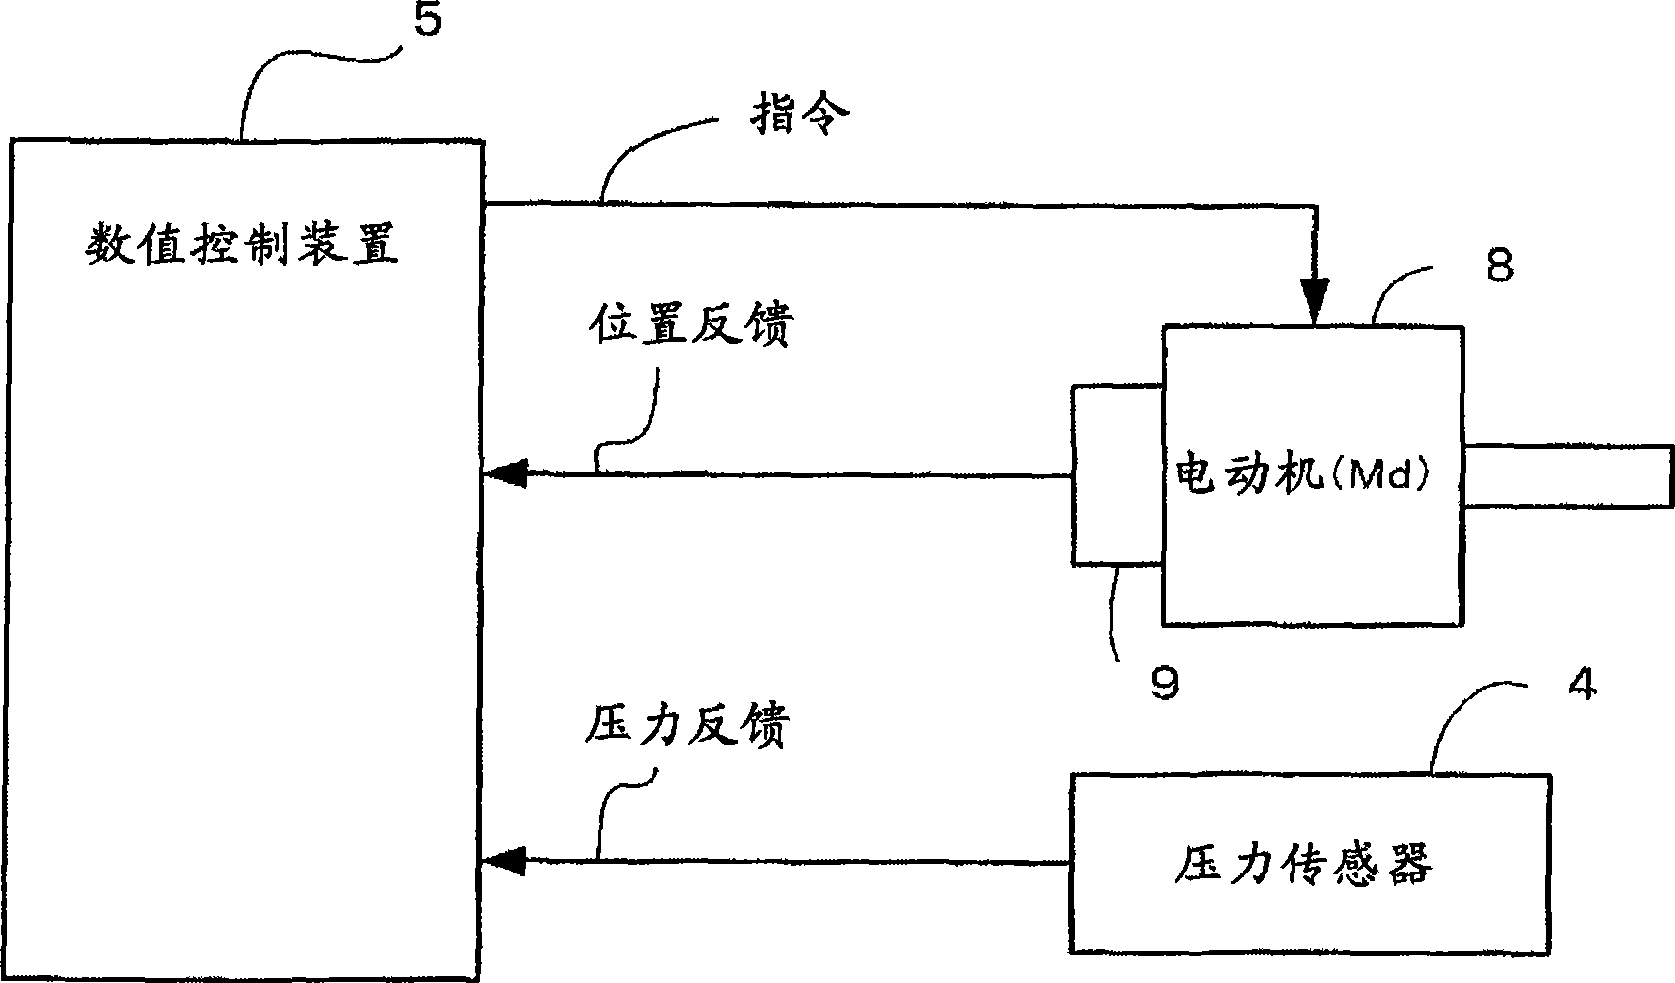 Numerical controller having function to switch between pressure control and position control